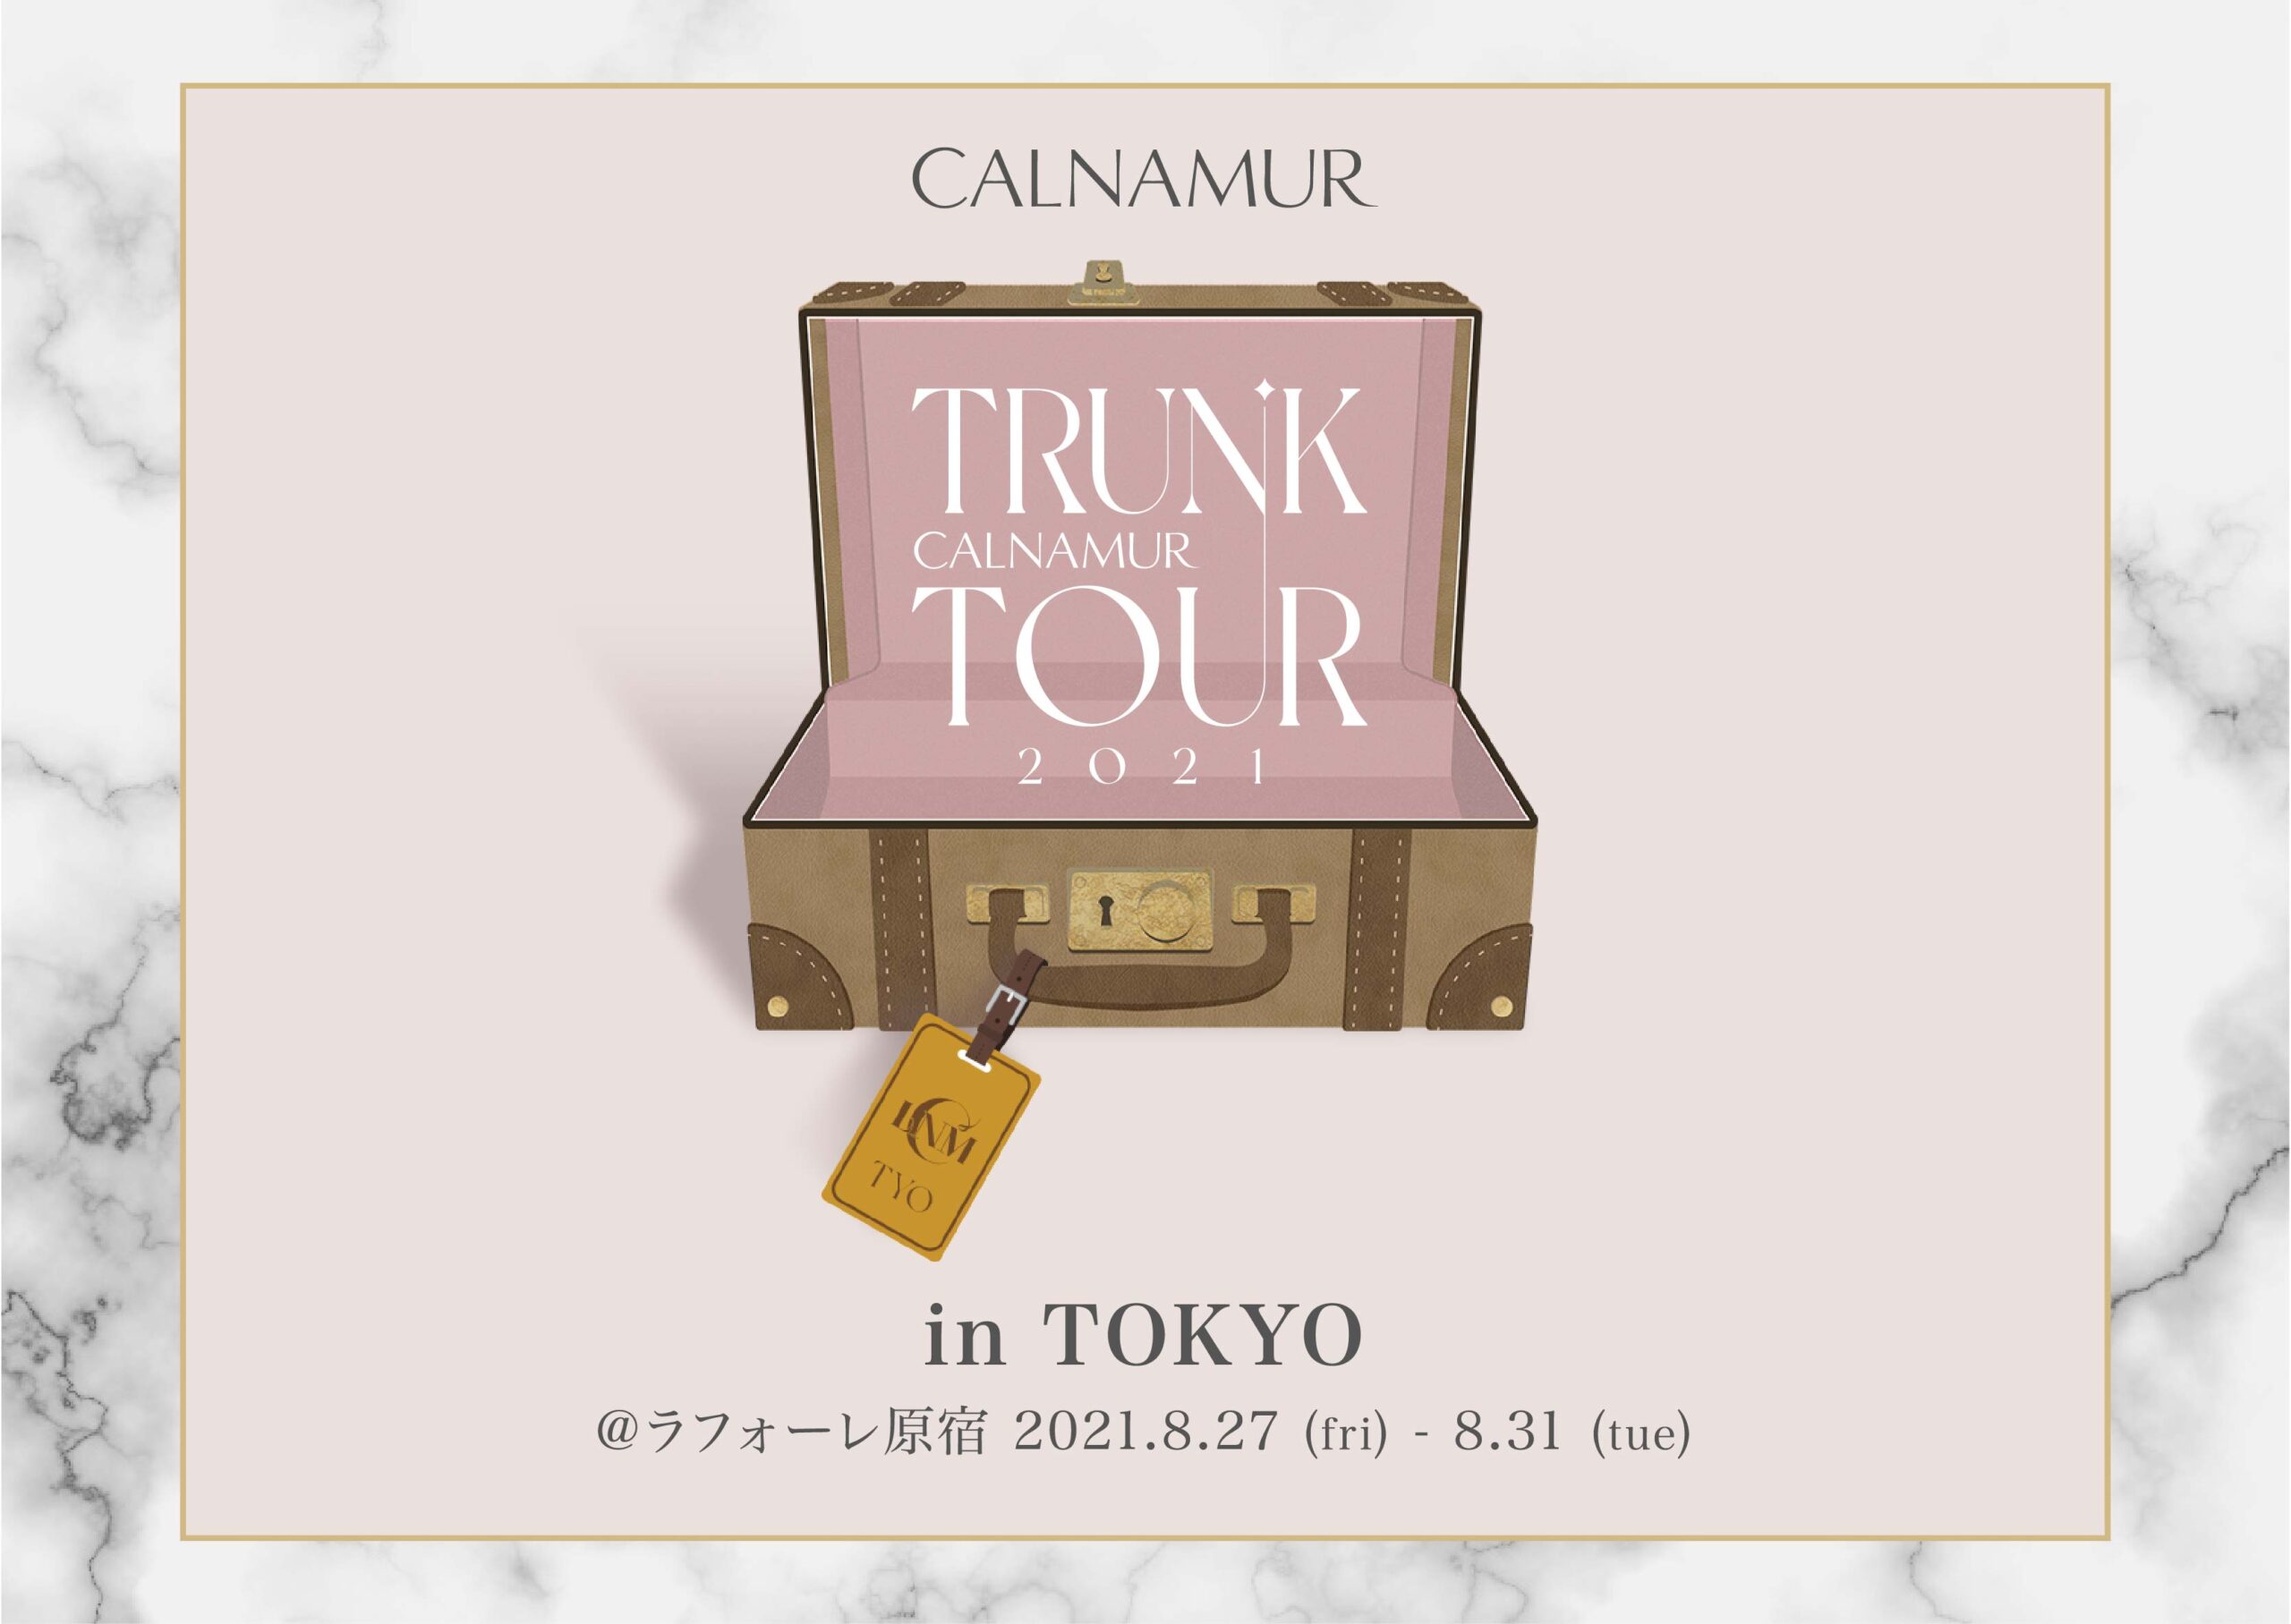 08.28(sat)TRUNK TOUR 2021 in TOKYO来店イベント入店予約について